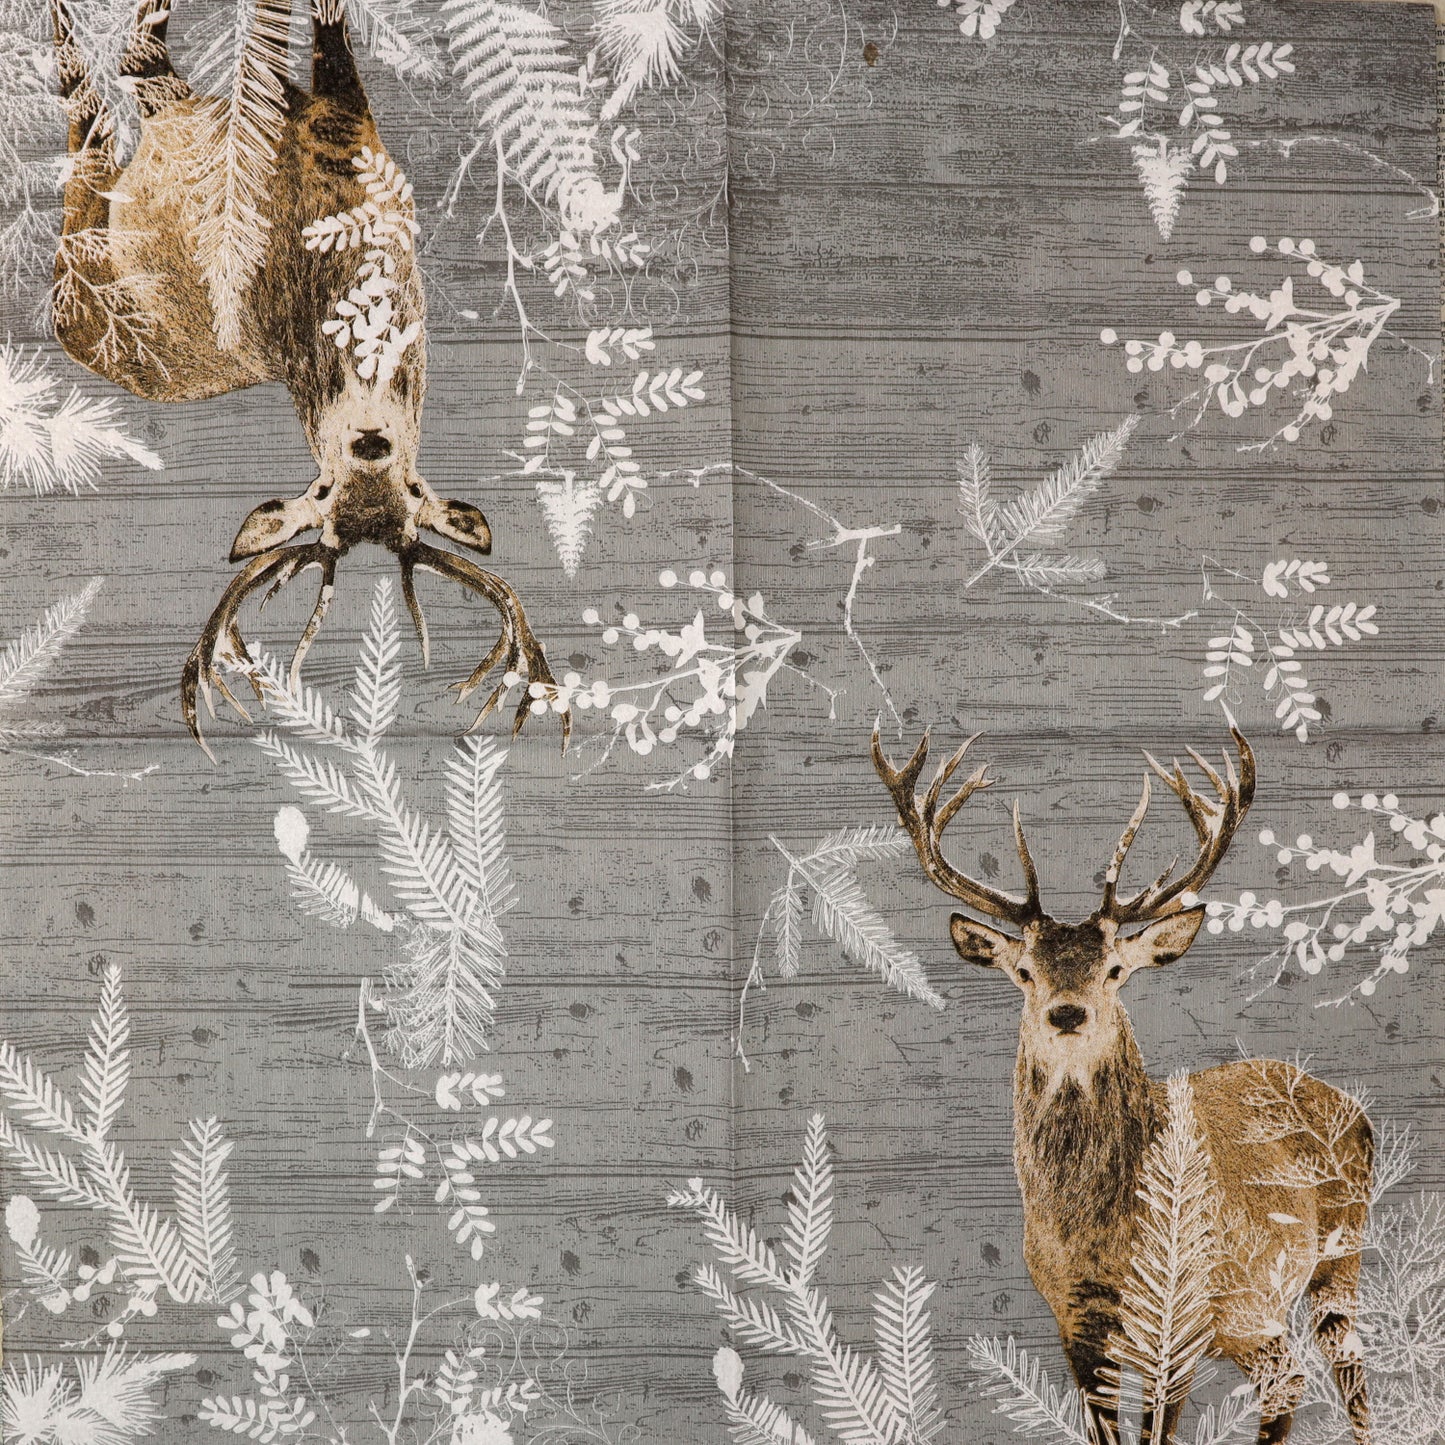 Decoupage Napkins 6.5" - Imperial Stag